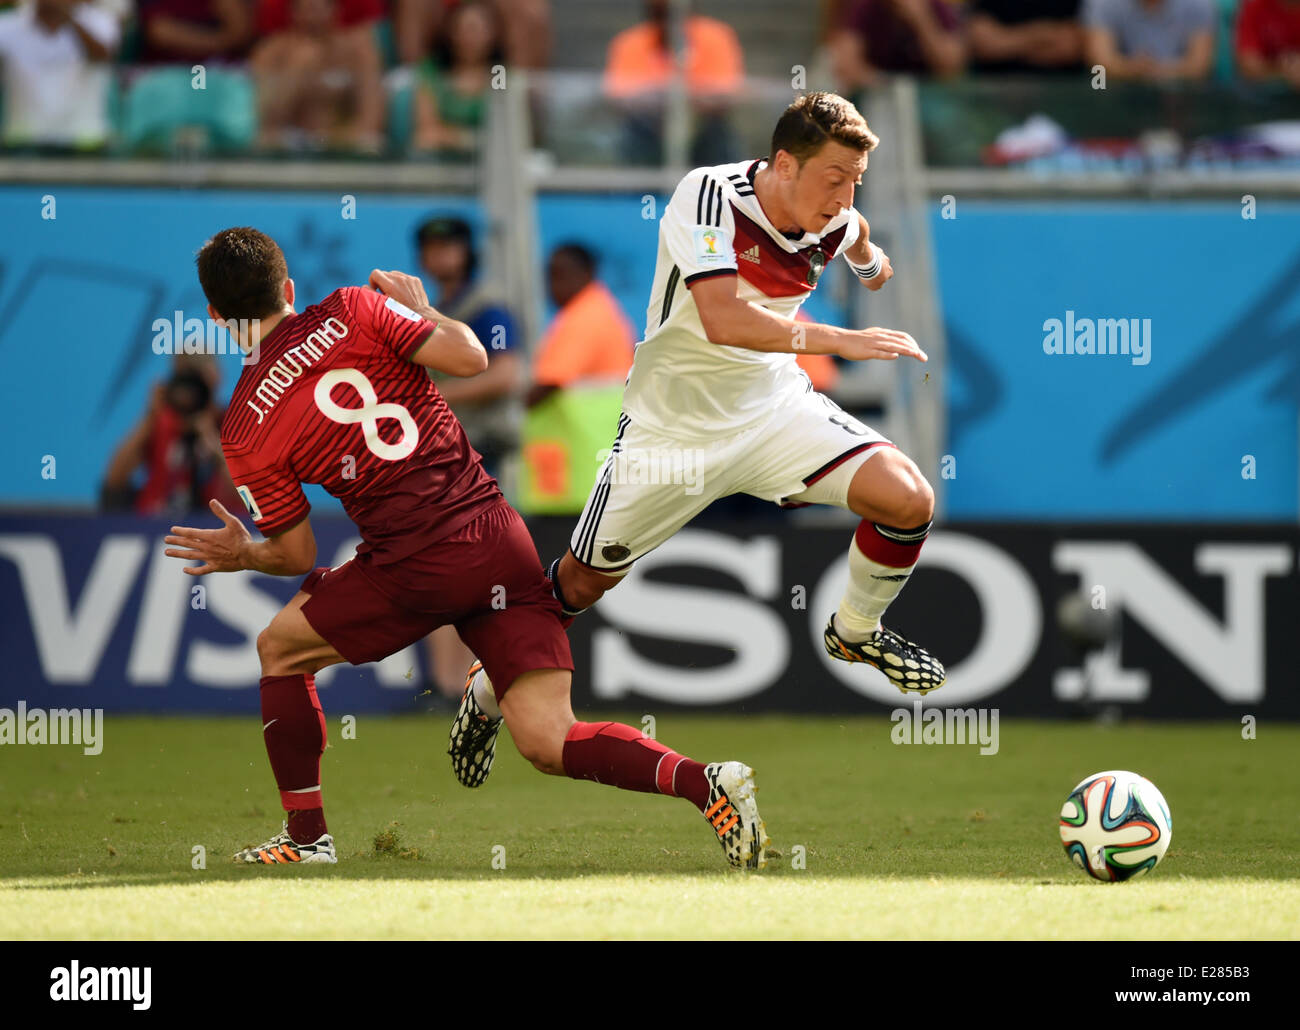 Salvador da Bahia, Brazil. 16th June, 2014. Mesut Oezil of Germany (R) vies for the ball with João Moutinho of Portugal during the FIFA World Cup 2014 group G preliminary round match between Germany and Portugal at the Arena Fonte Nova Stadium in Salvador da Bahia, Brazil, 16 June 2014. Credit:  dpa picture alliance/Alamy Live News Stock Photo